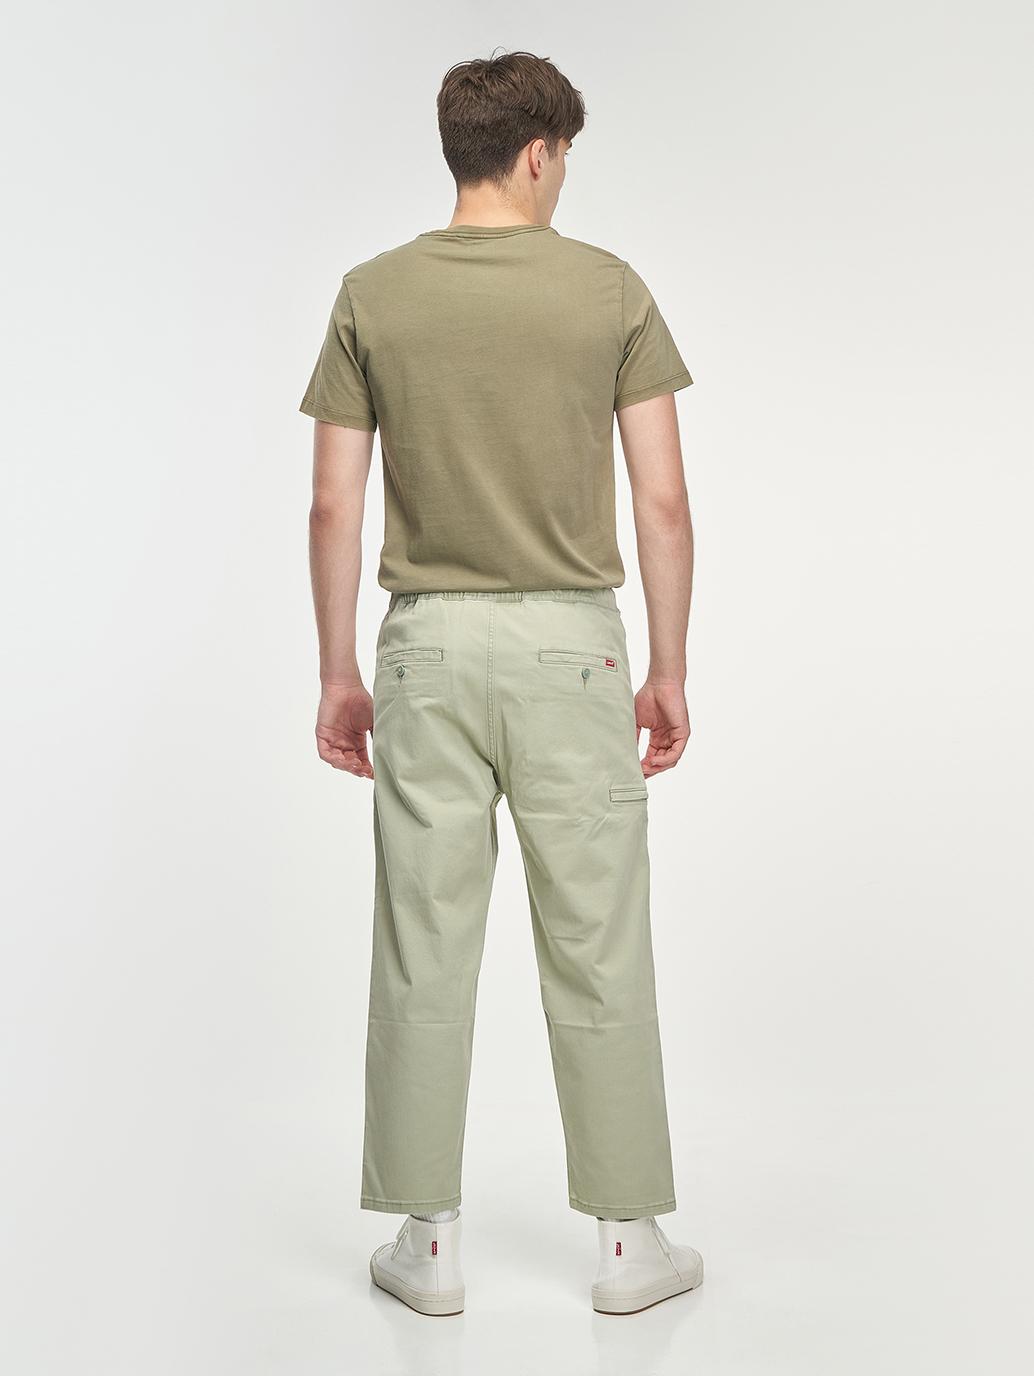 levis malaysia mens crop utility chino A10450001 02 Back